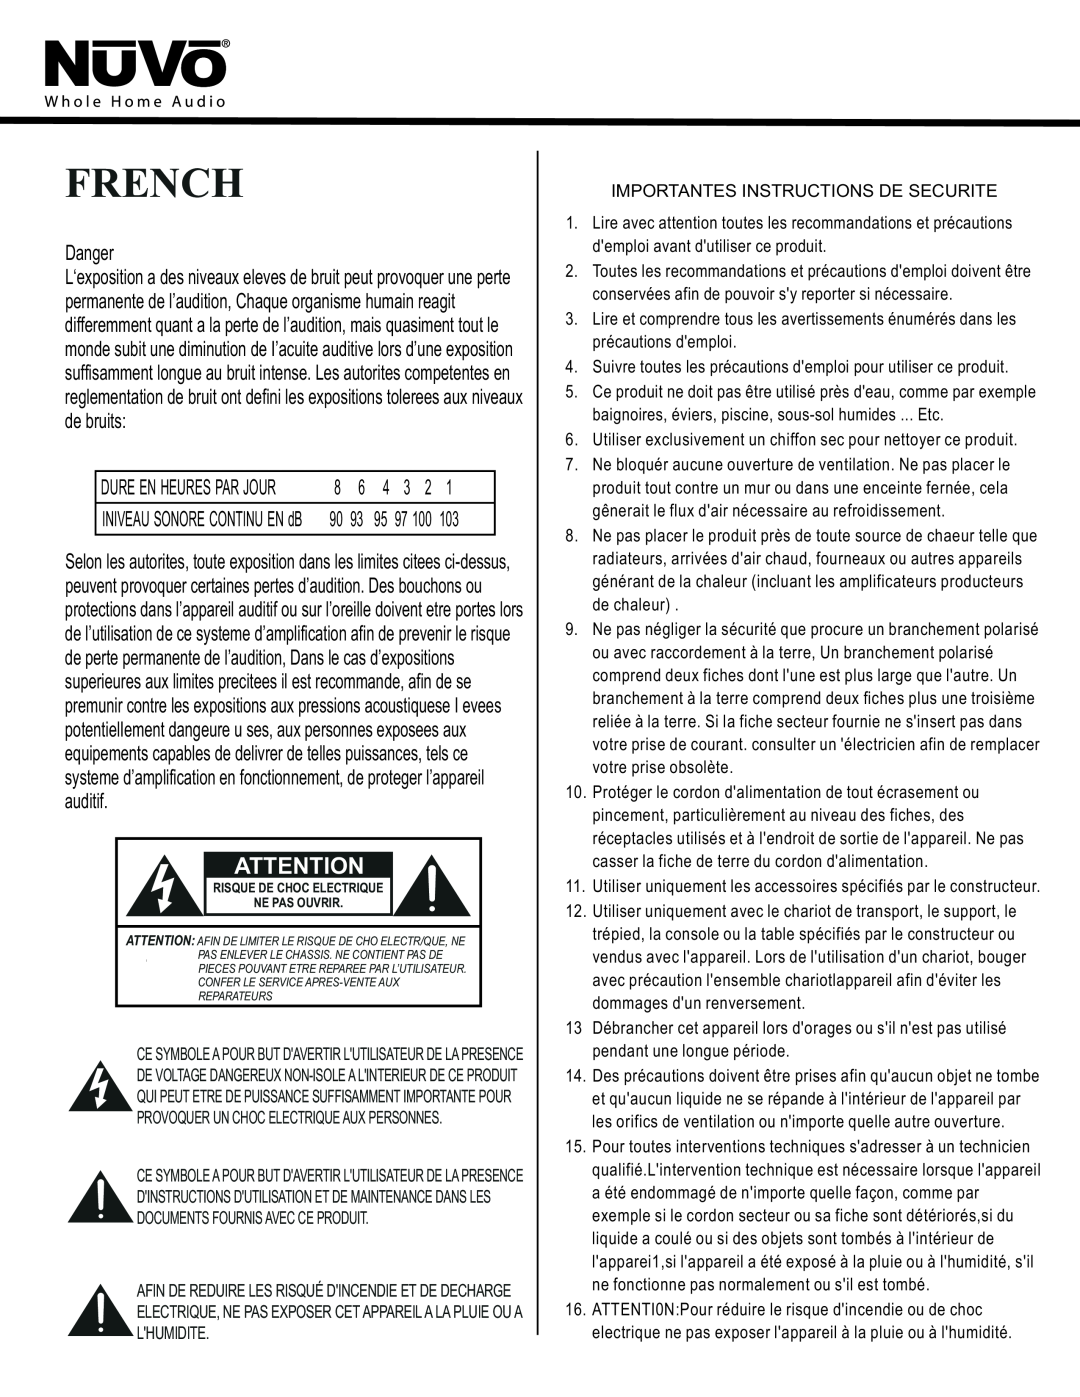 Nuvo NV-MPS4 manual French 